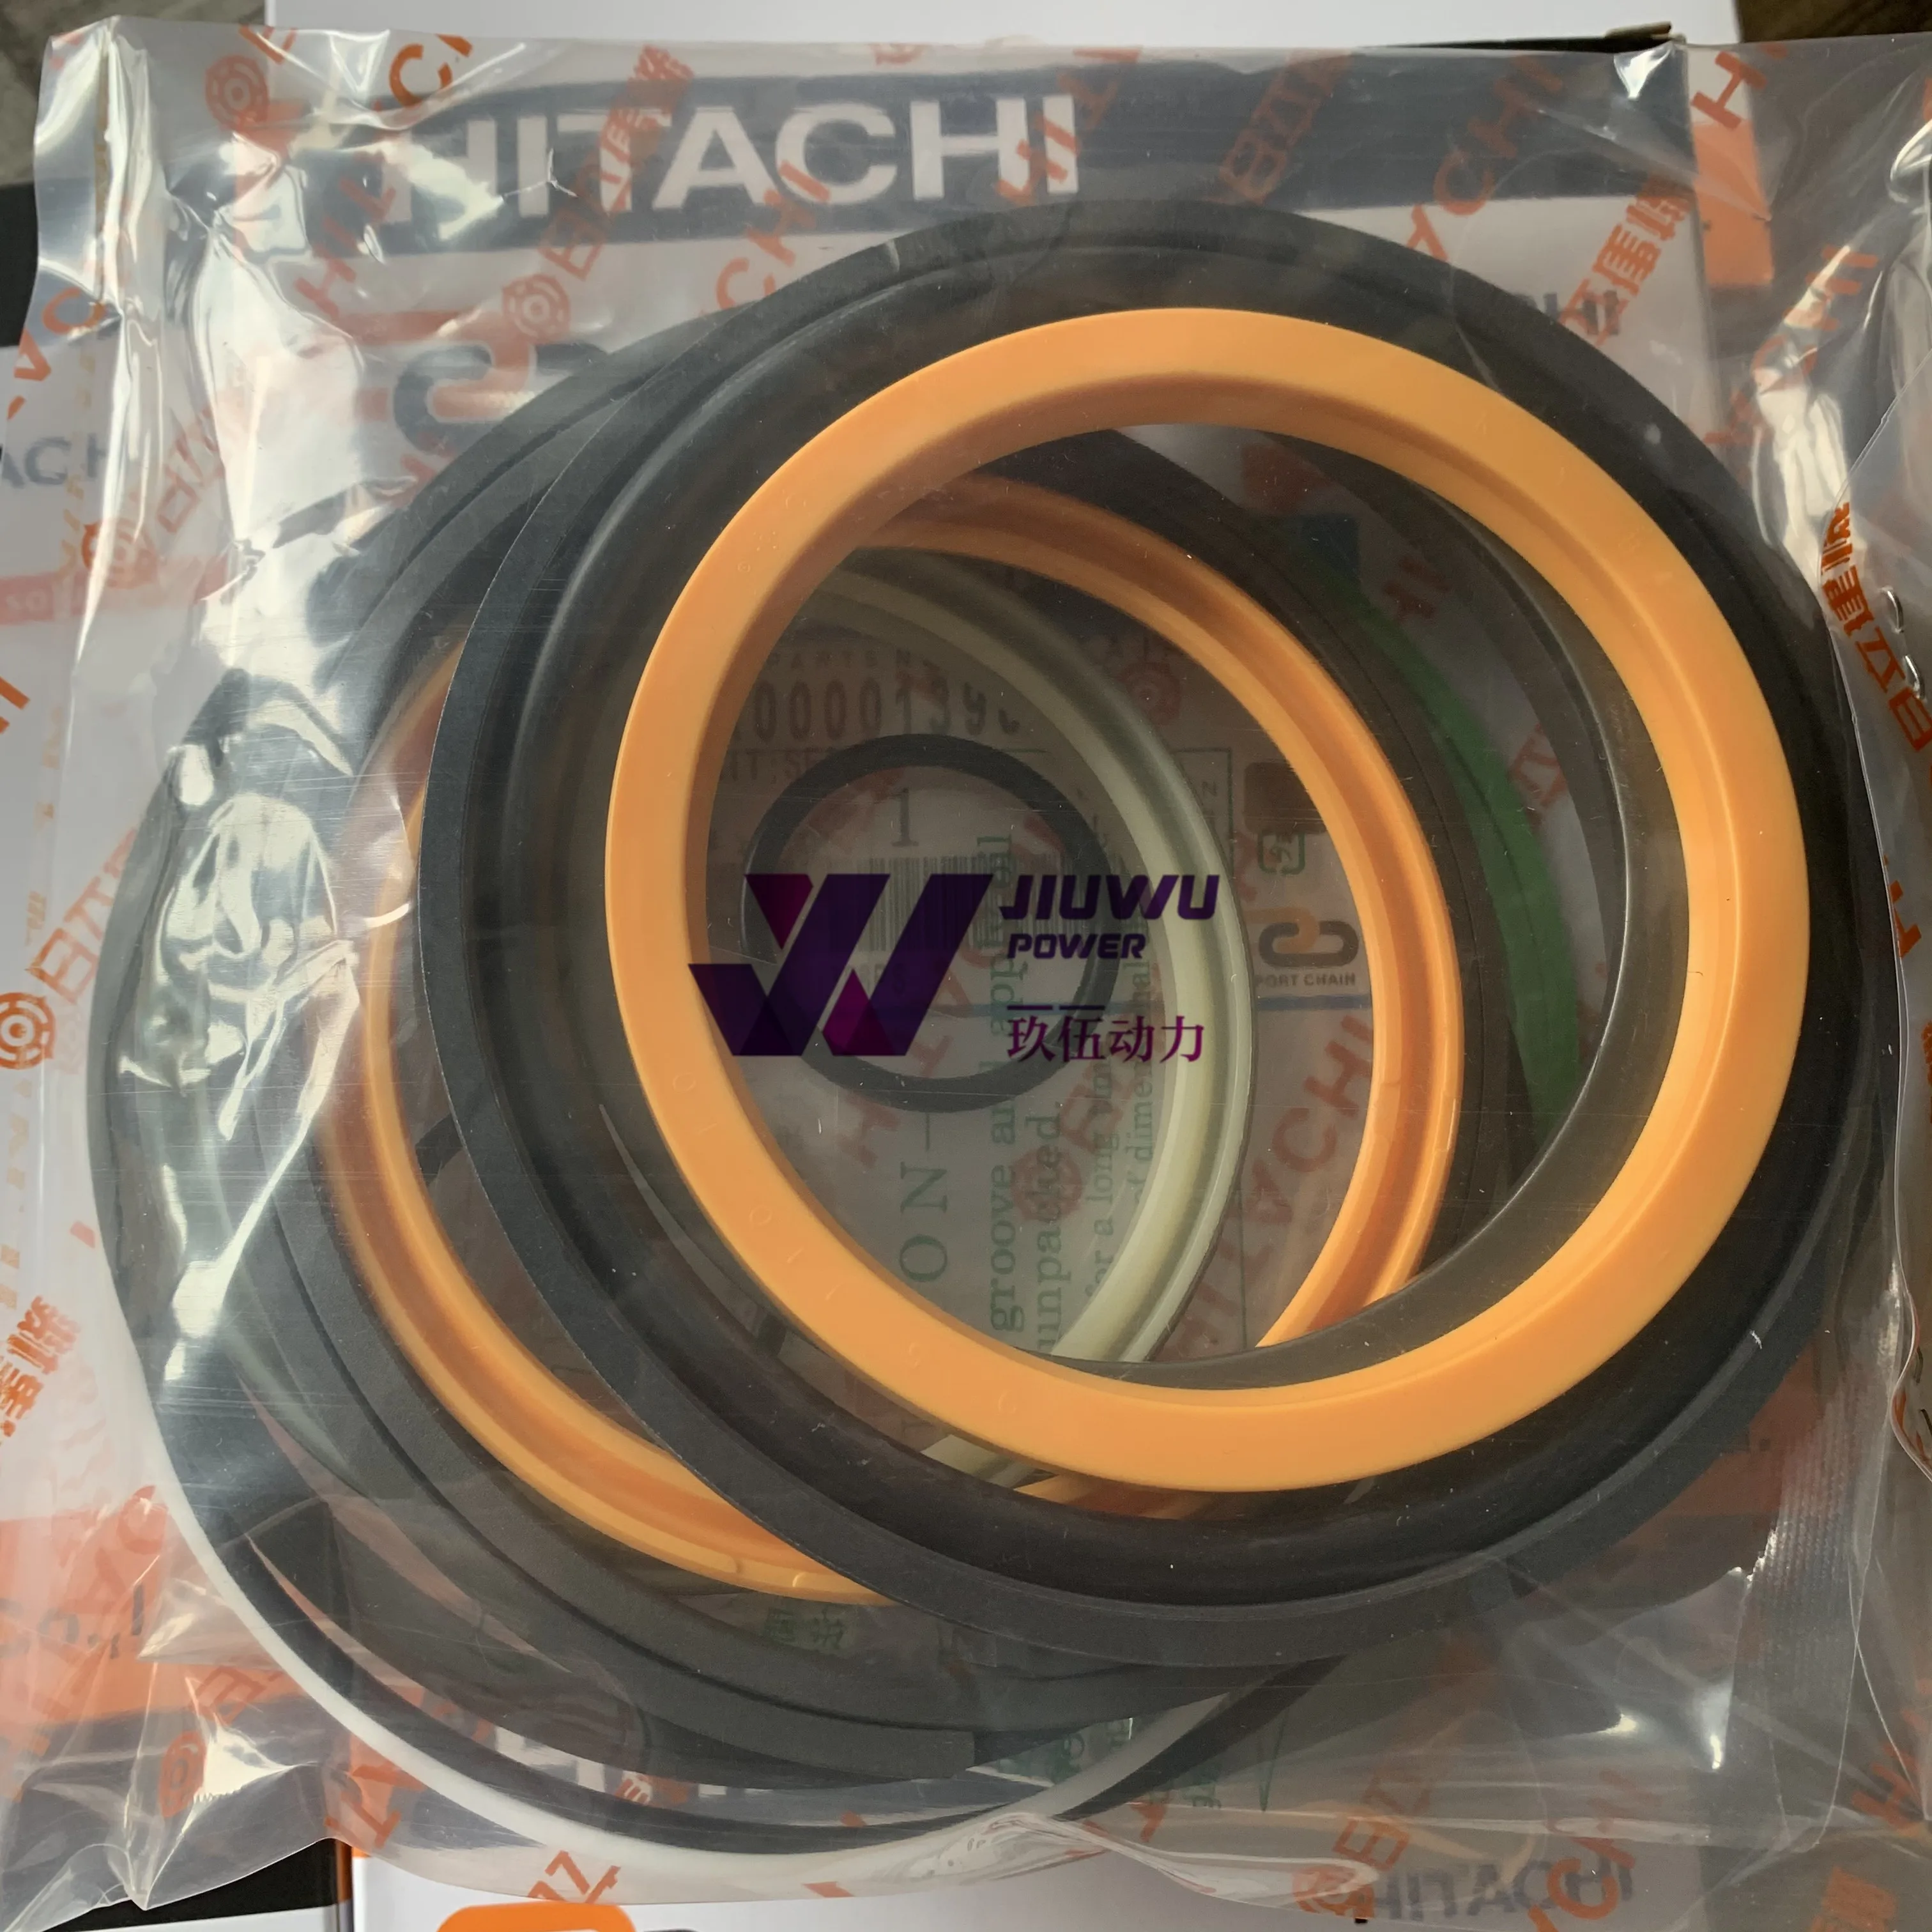 Ya00001398 Seal Kit Bucket Seal Kit For Zx330-5g Zx350-5g Zax330-5g  Zax350-5g - Buy Bucket Seal Kit,Ya00001398 Seal Kit,Bucket Seal Kit For  Zx330-5g 